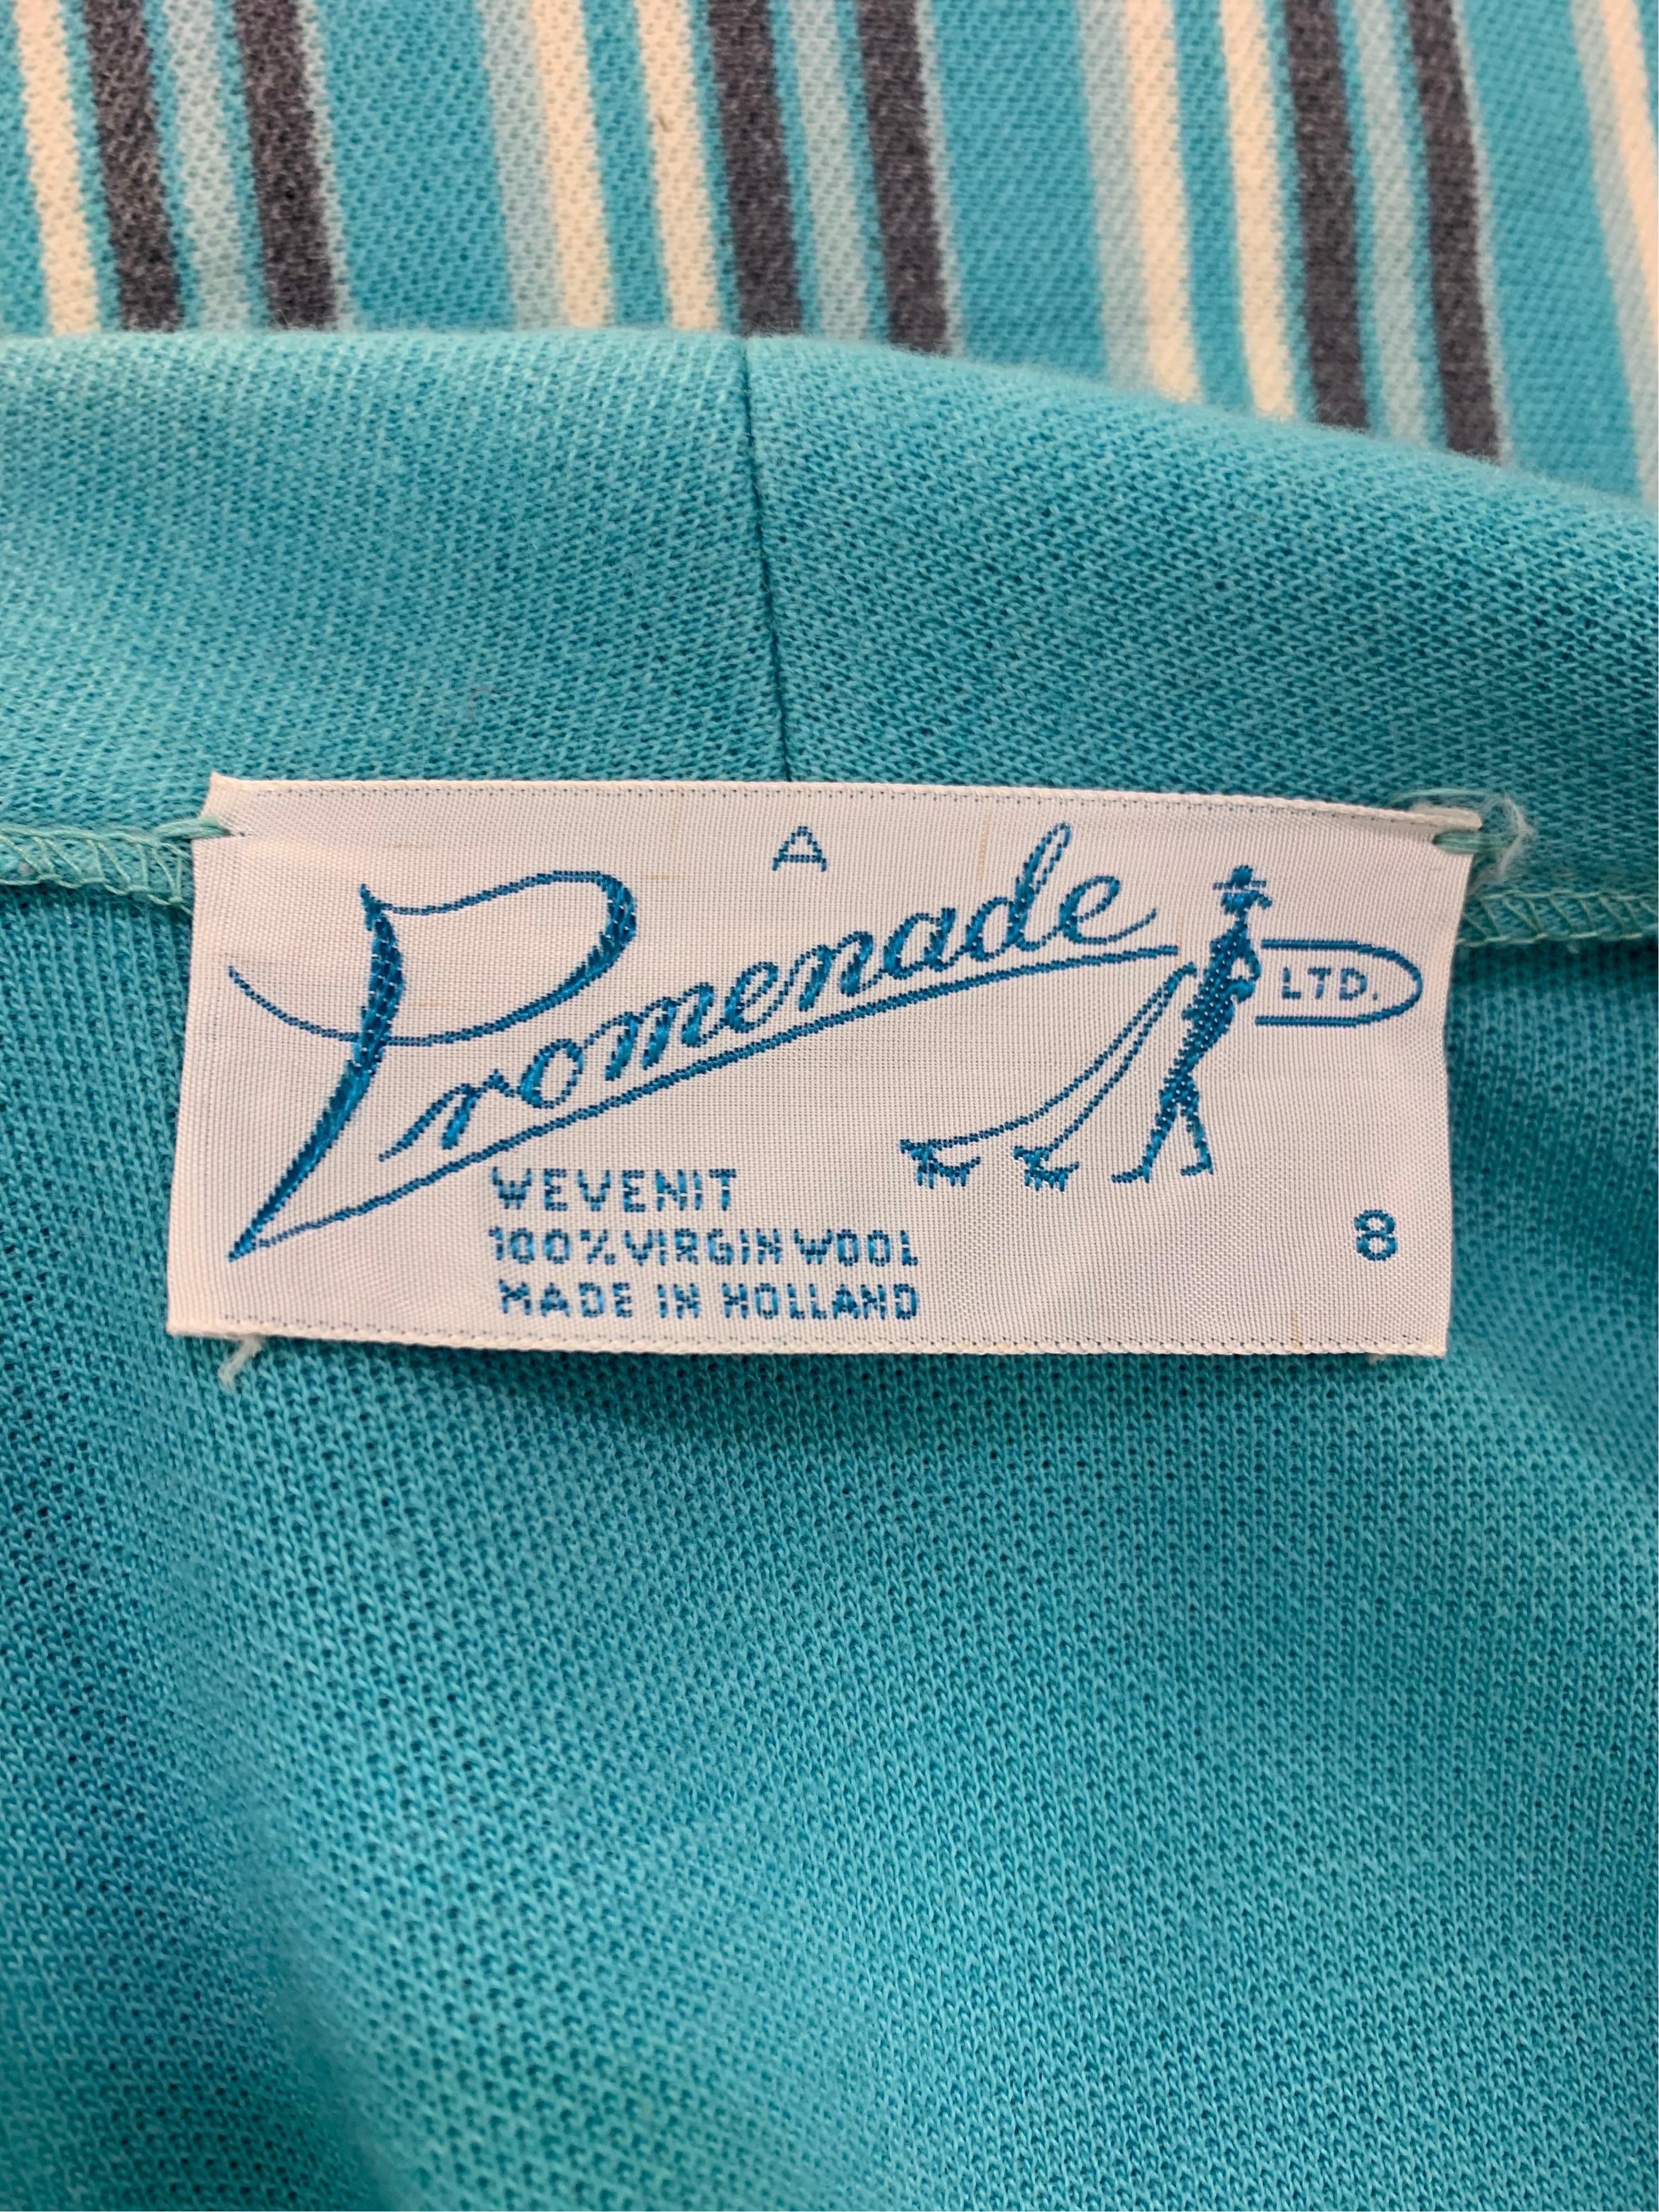 1960 Promenade - Holland Turquoise Wool Double-Knit 3-Piece Skirt Suit  For Sale 4